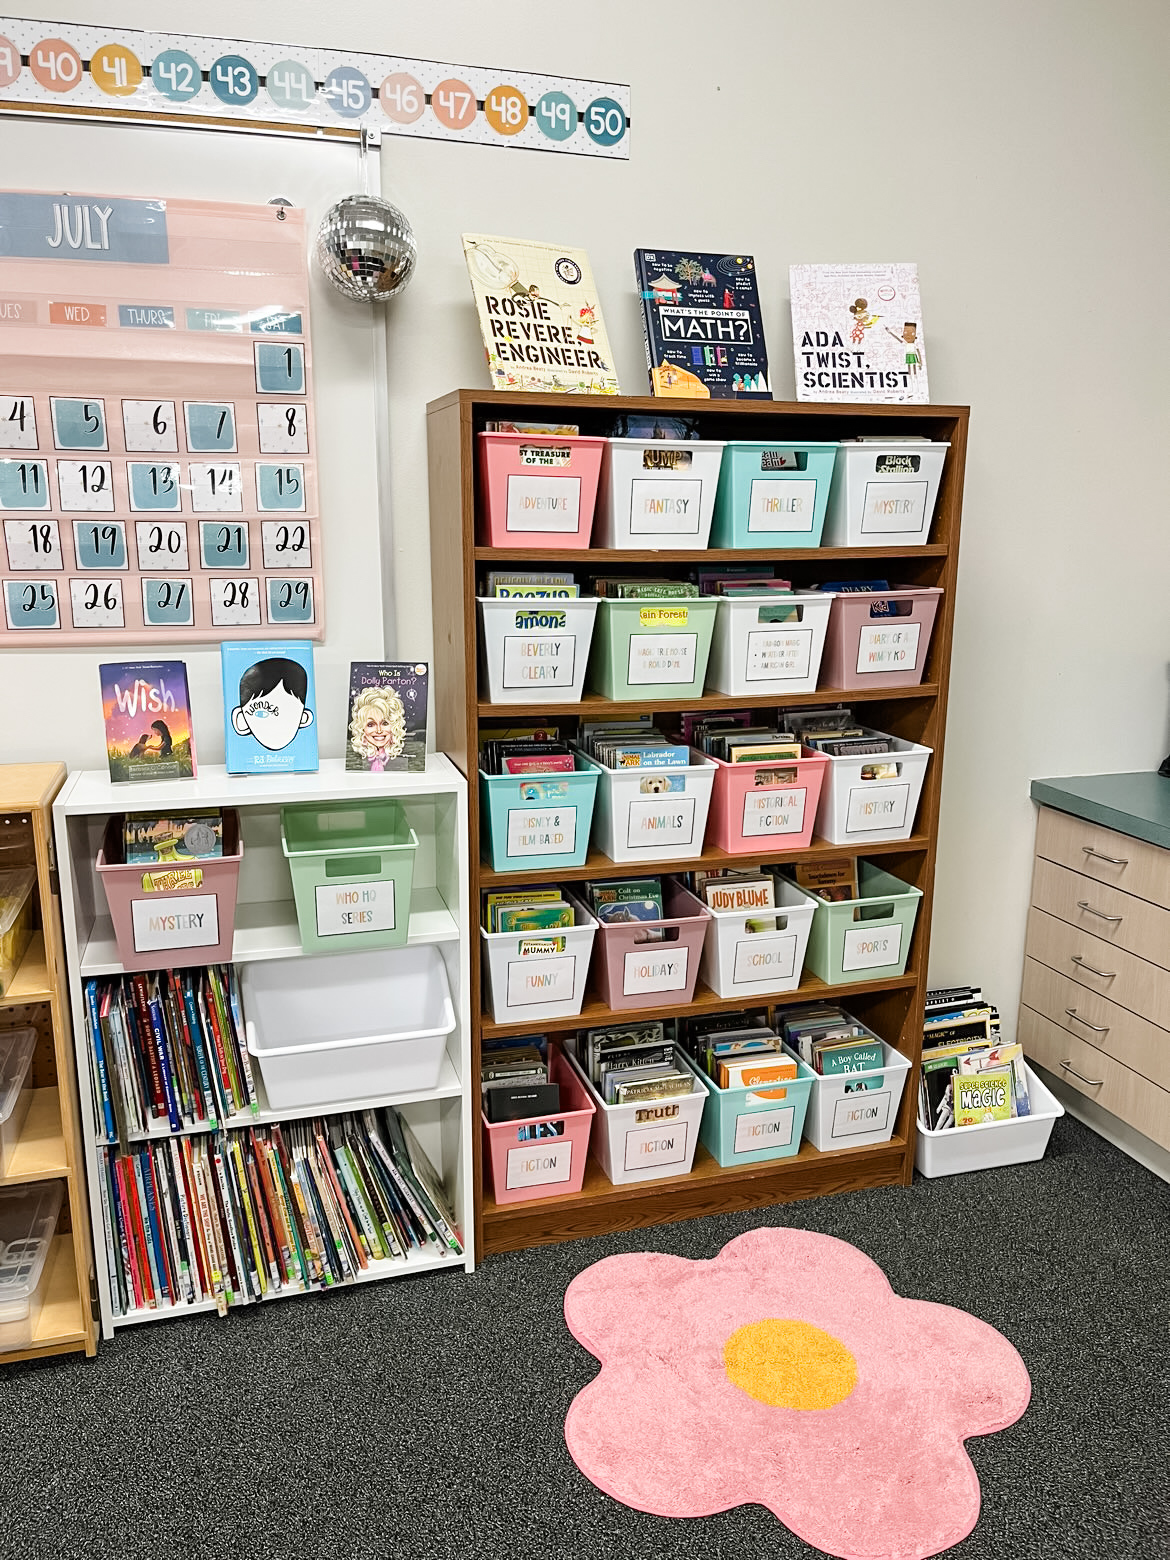 This image shows classroom library ideas using two bookshelves. One bookshelf is lower and has picture books stored there. The other bookshelf is tall and has books organized in buckets by genres. 